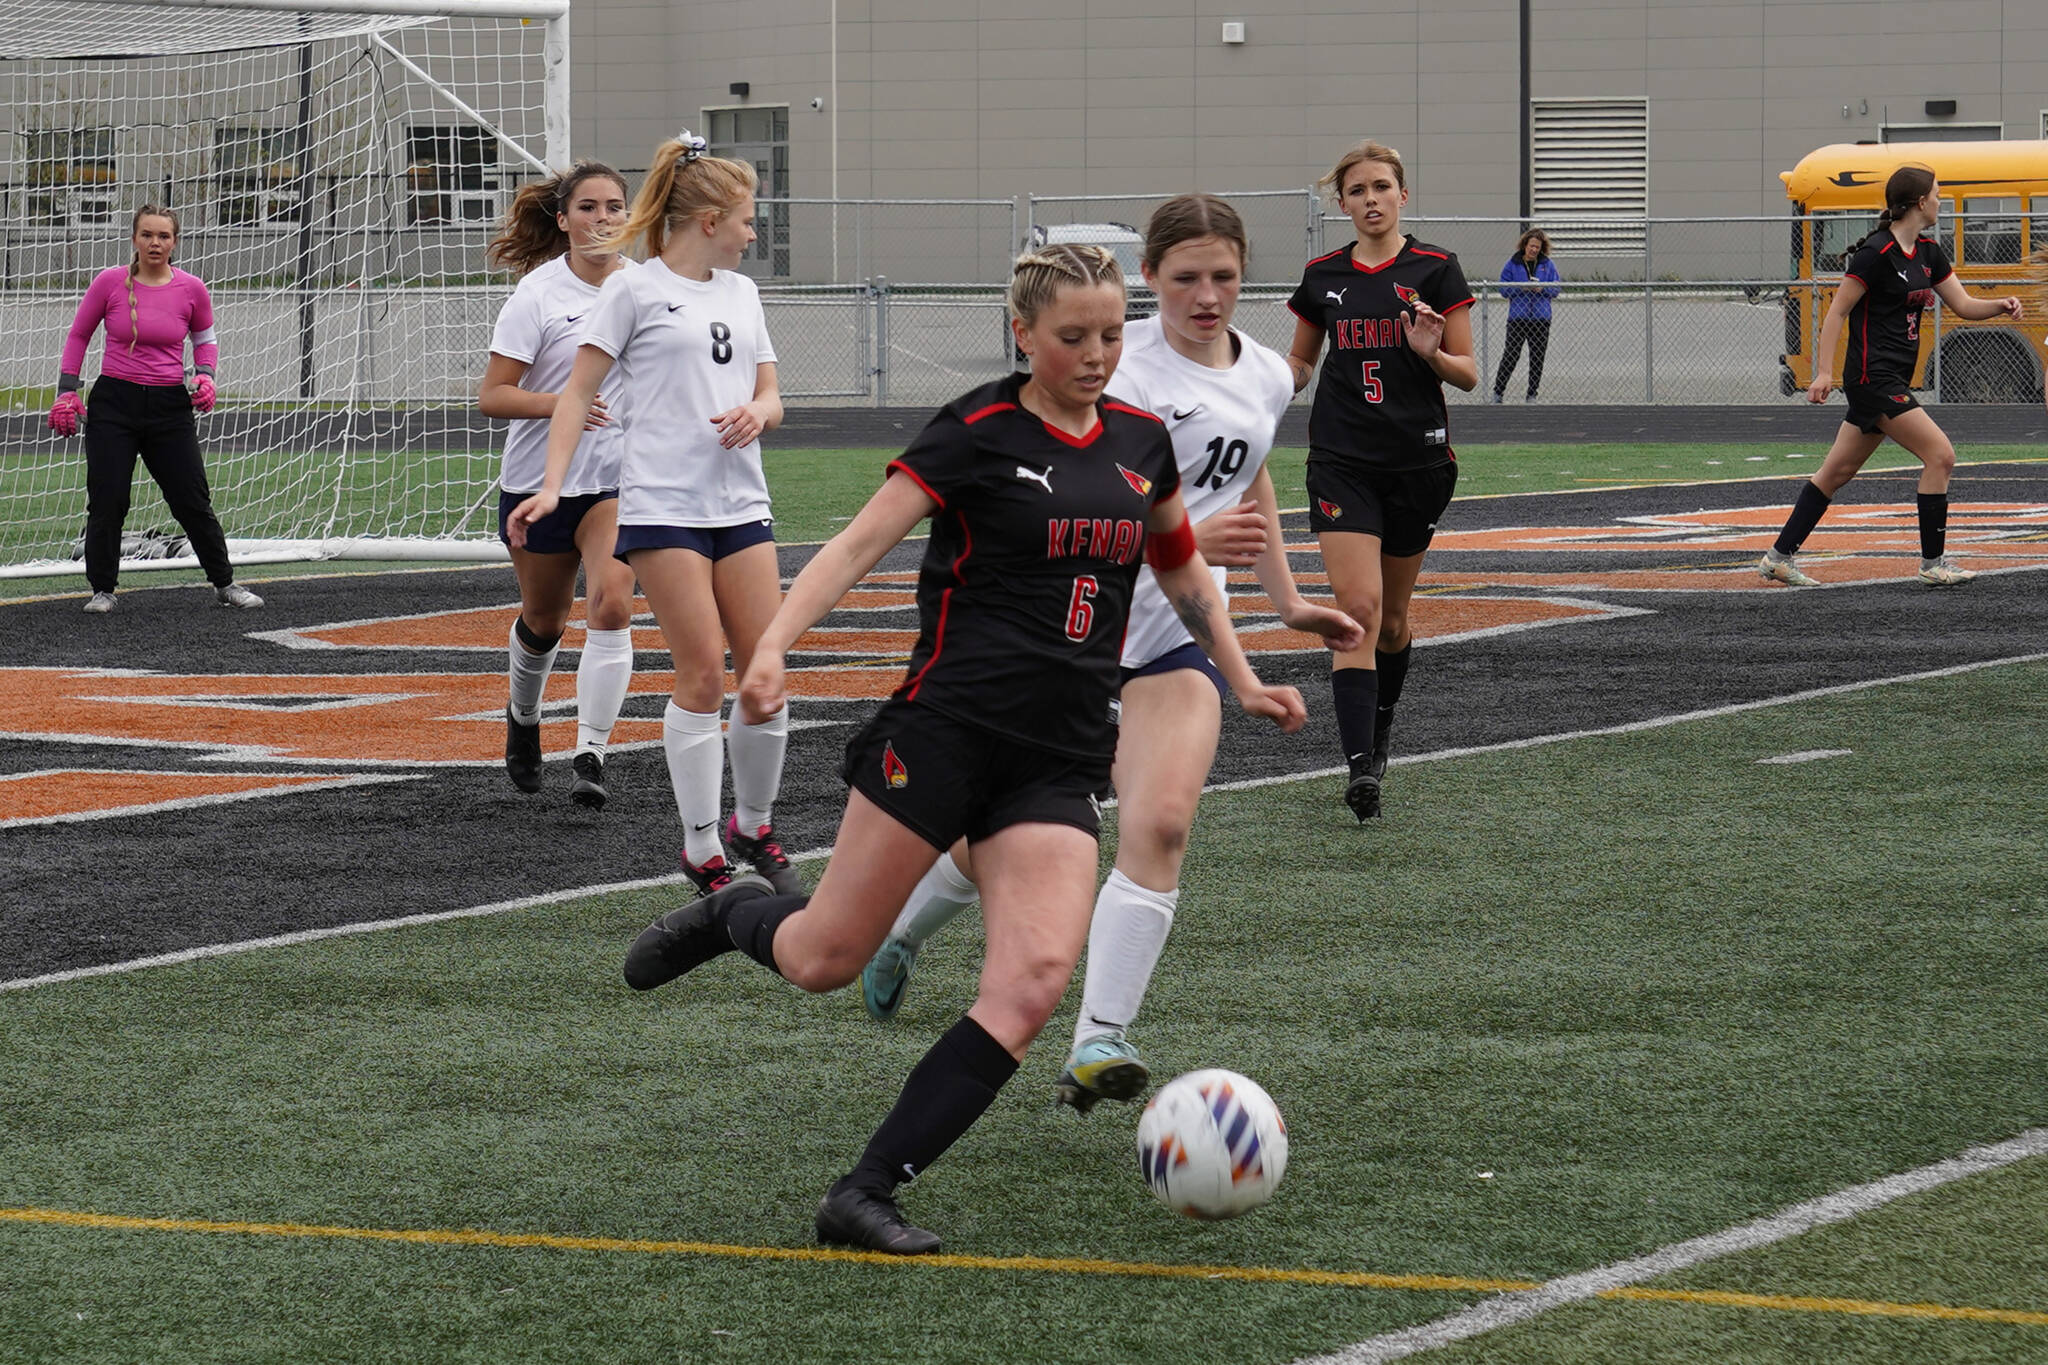 Kenai Central’s Kori Moore races after the ball closely pursued by Soldotna’s Anika Jedlicka during the Division II Soccer State Championship on Saturday, May 27, 2023, at West Anchorage High School in Anchorage, Alaska. (Jake Dye/Peninsula Clarion)